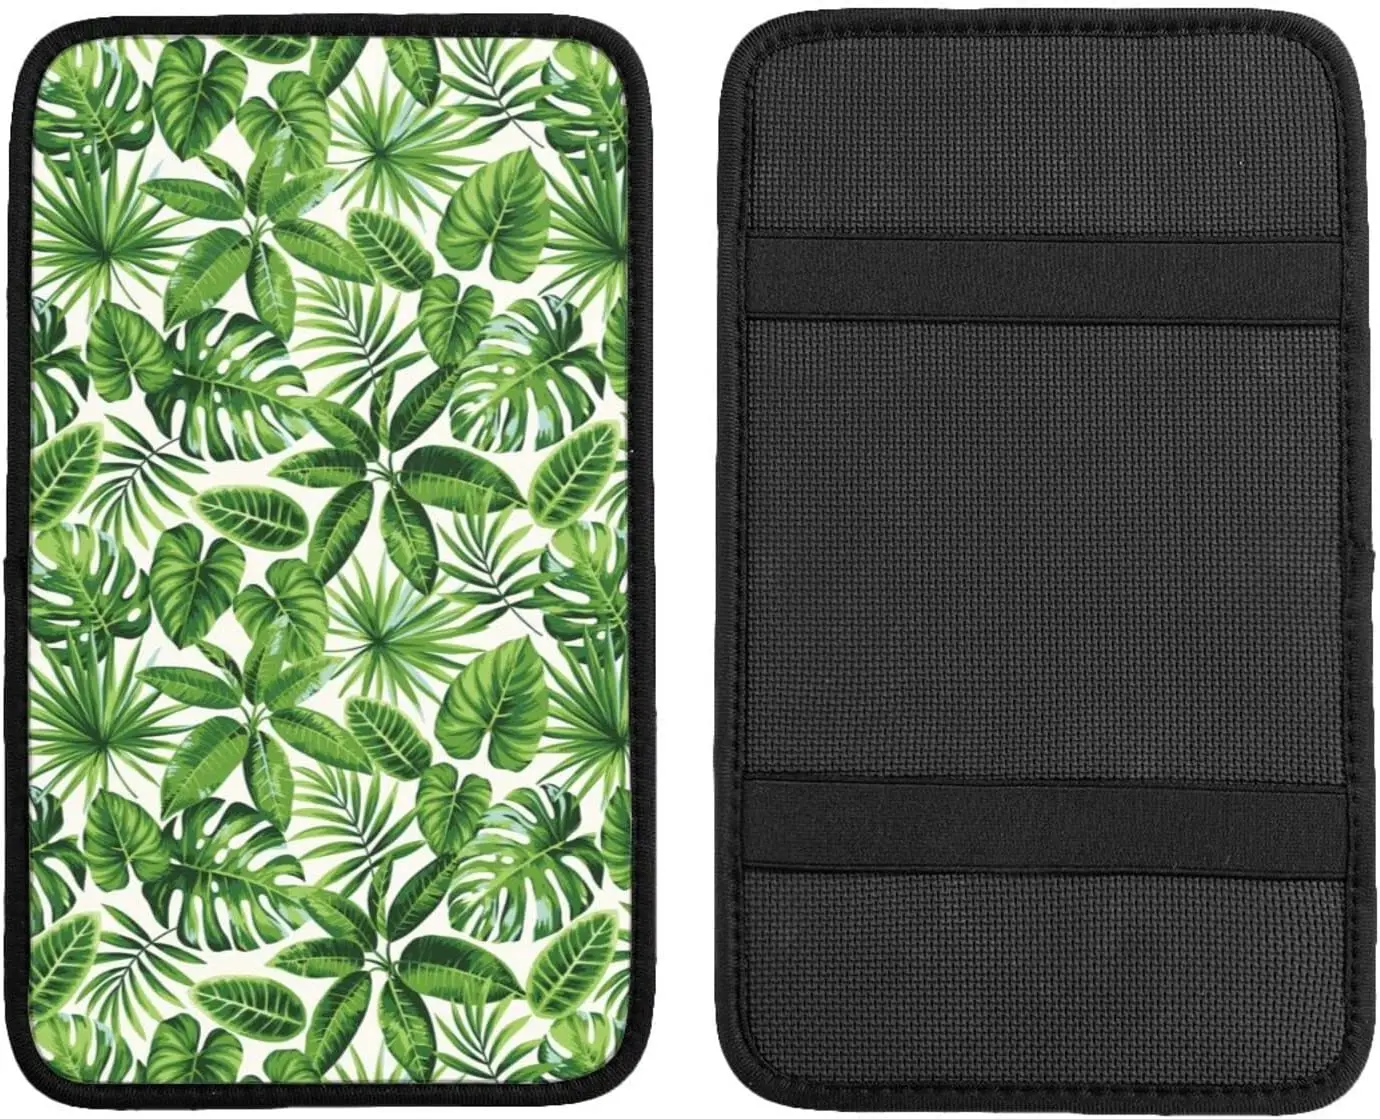 

Auto Center Console Armrest Cover Pad, Tropical Green Exotic Palm Leaves Universal Fit Car Armrest Cover Cushion Mat f